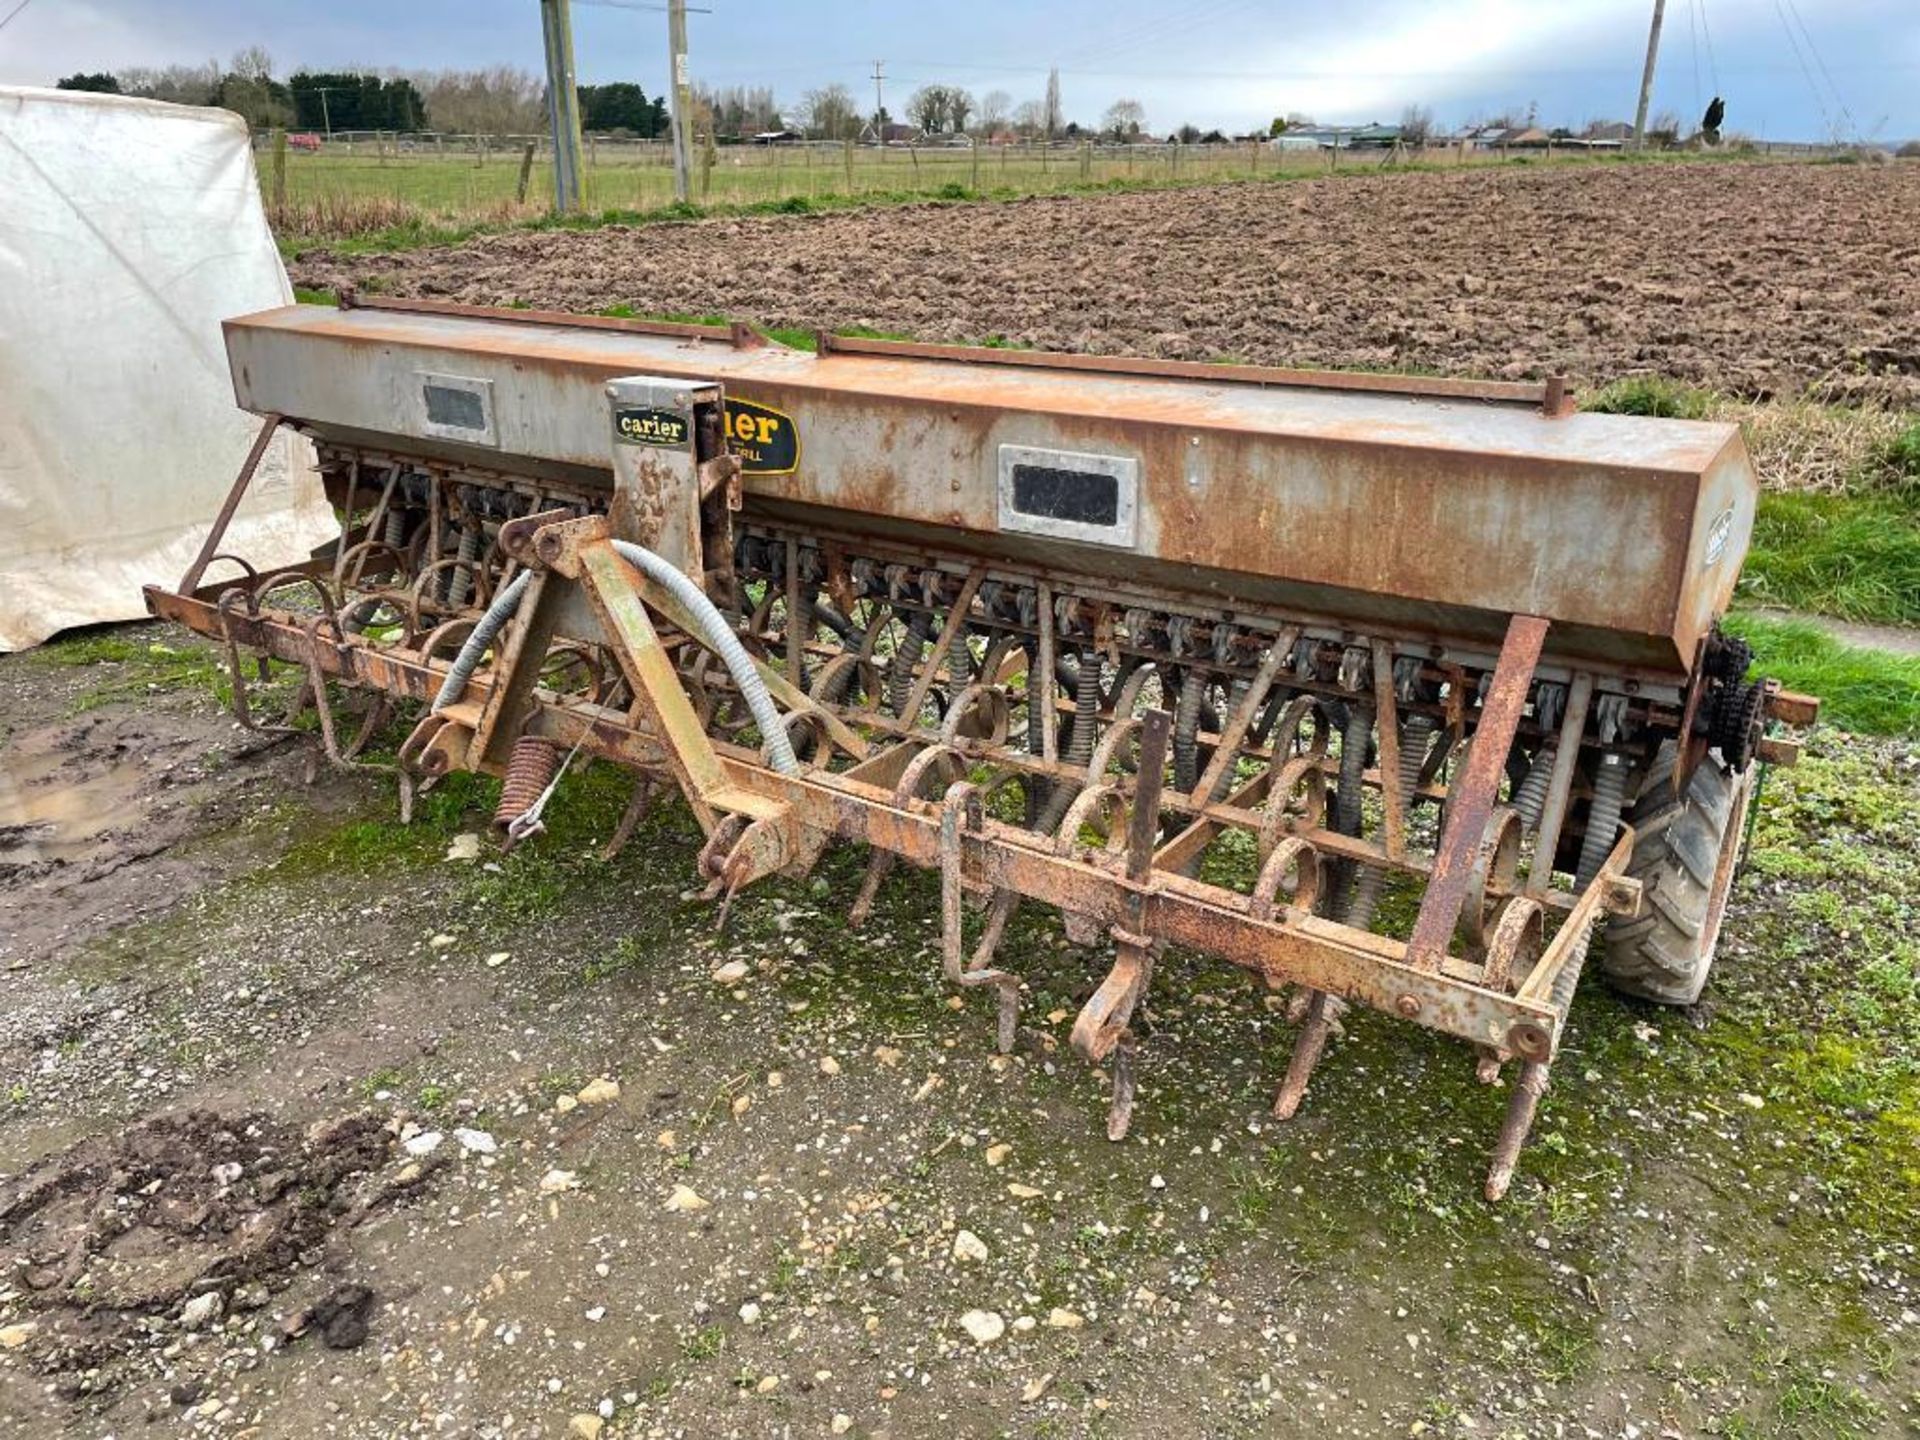 Carrier 12ft linkage mounted cultivator drill